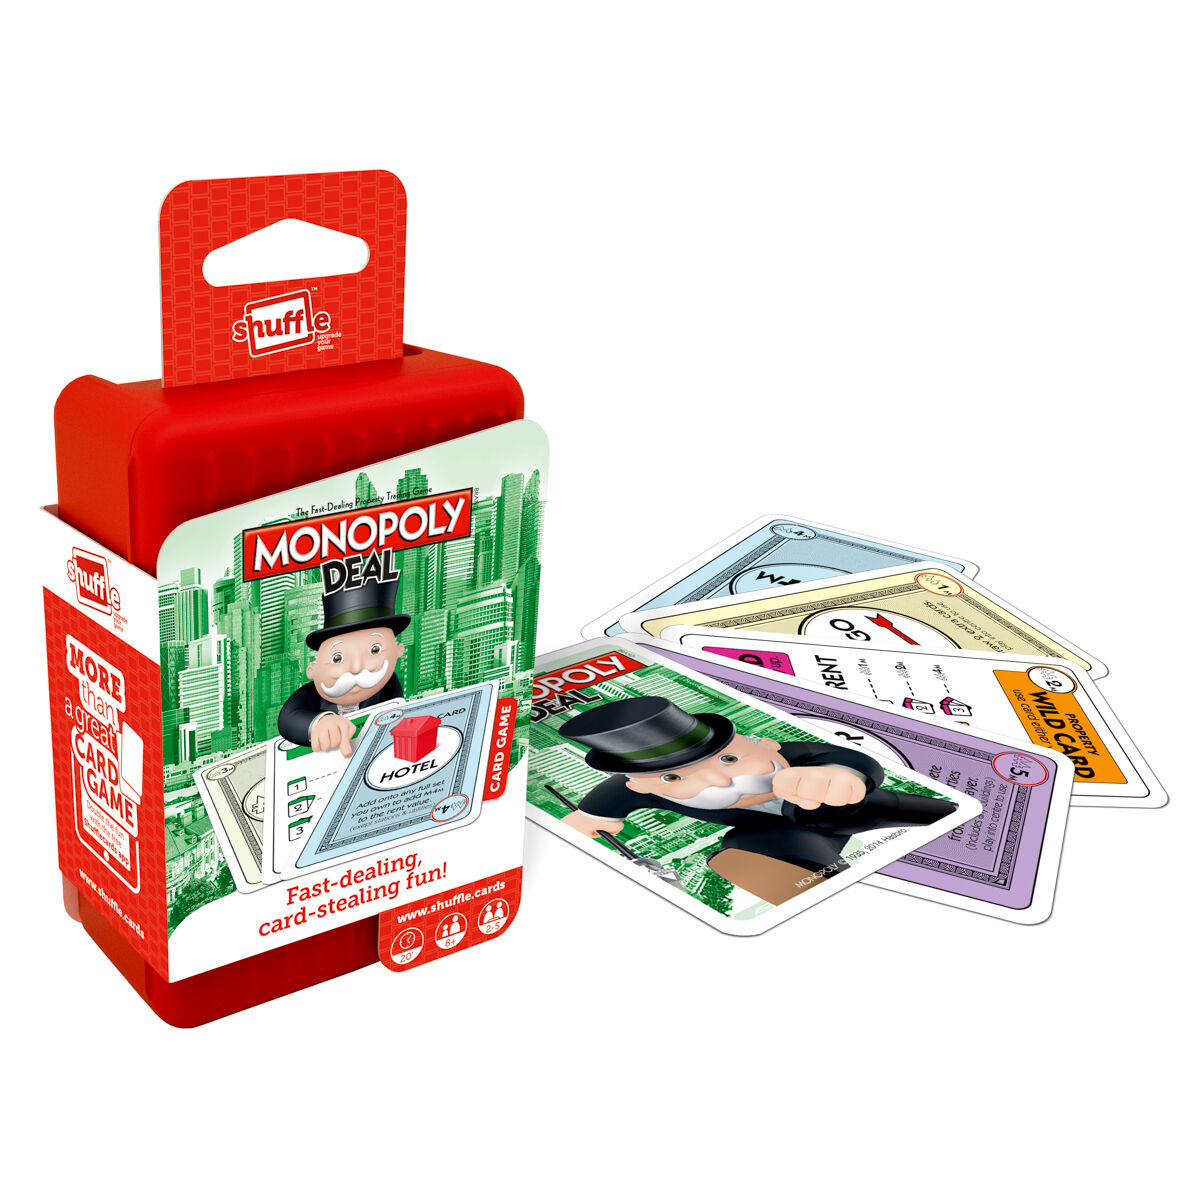 Shuffle Monopoly Deal Card Game - Fast-Playing Travel Pack ...